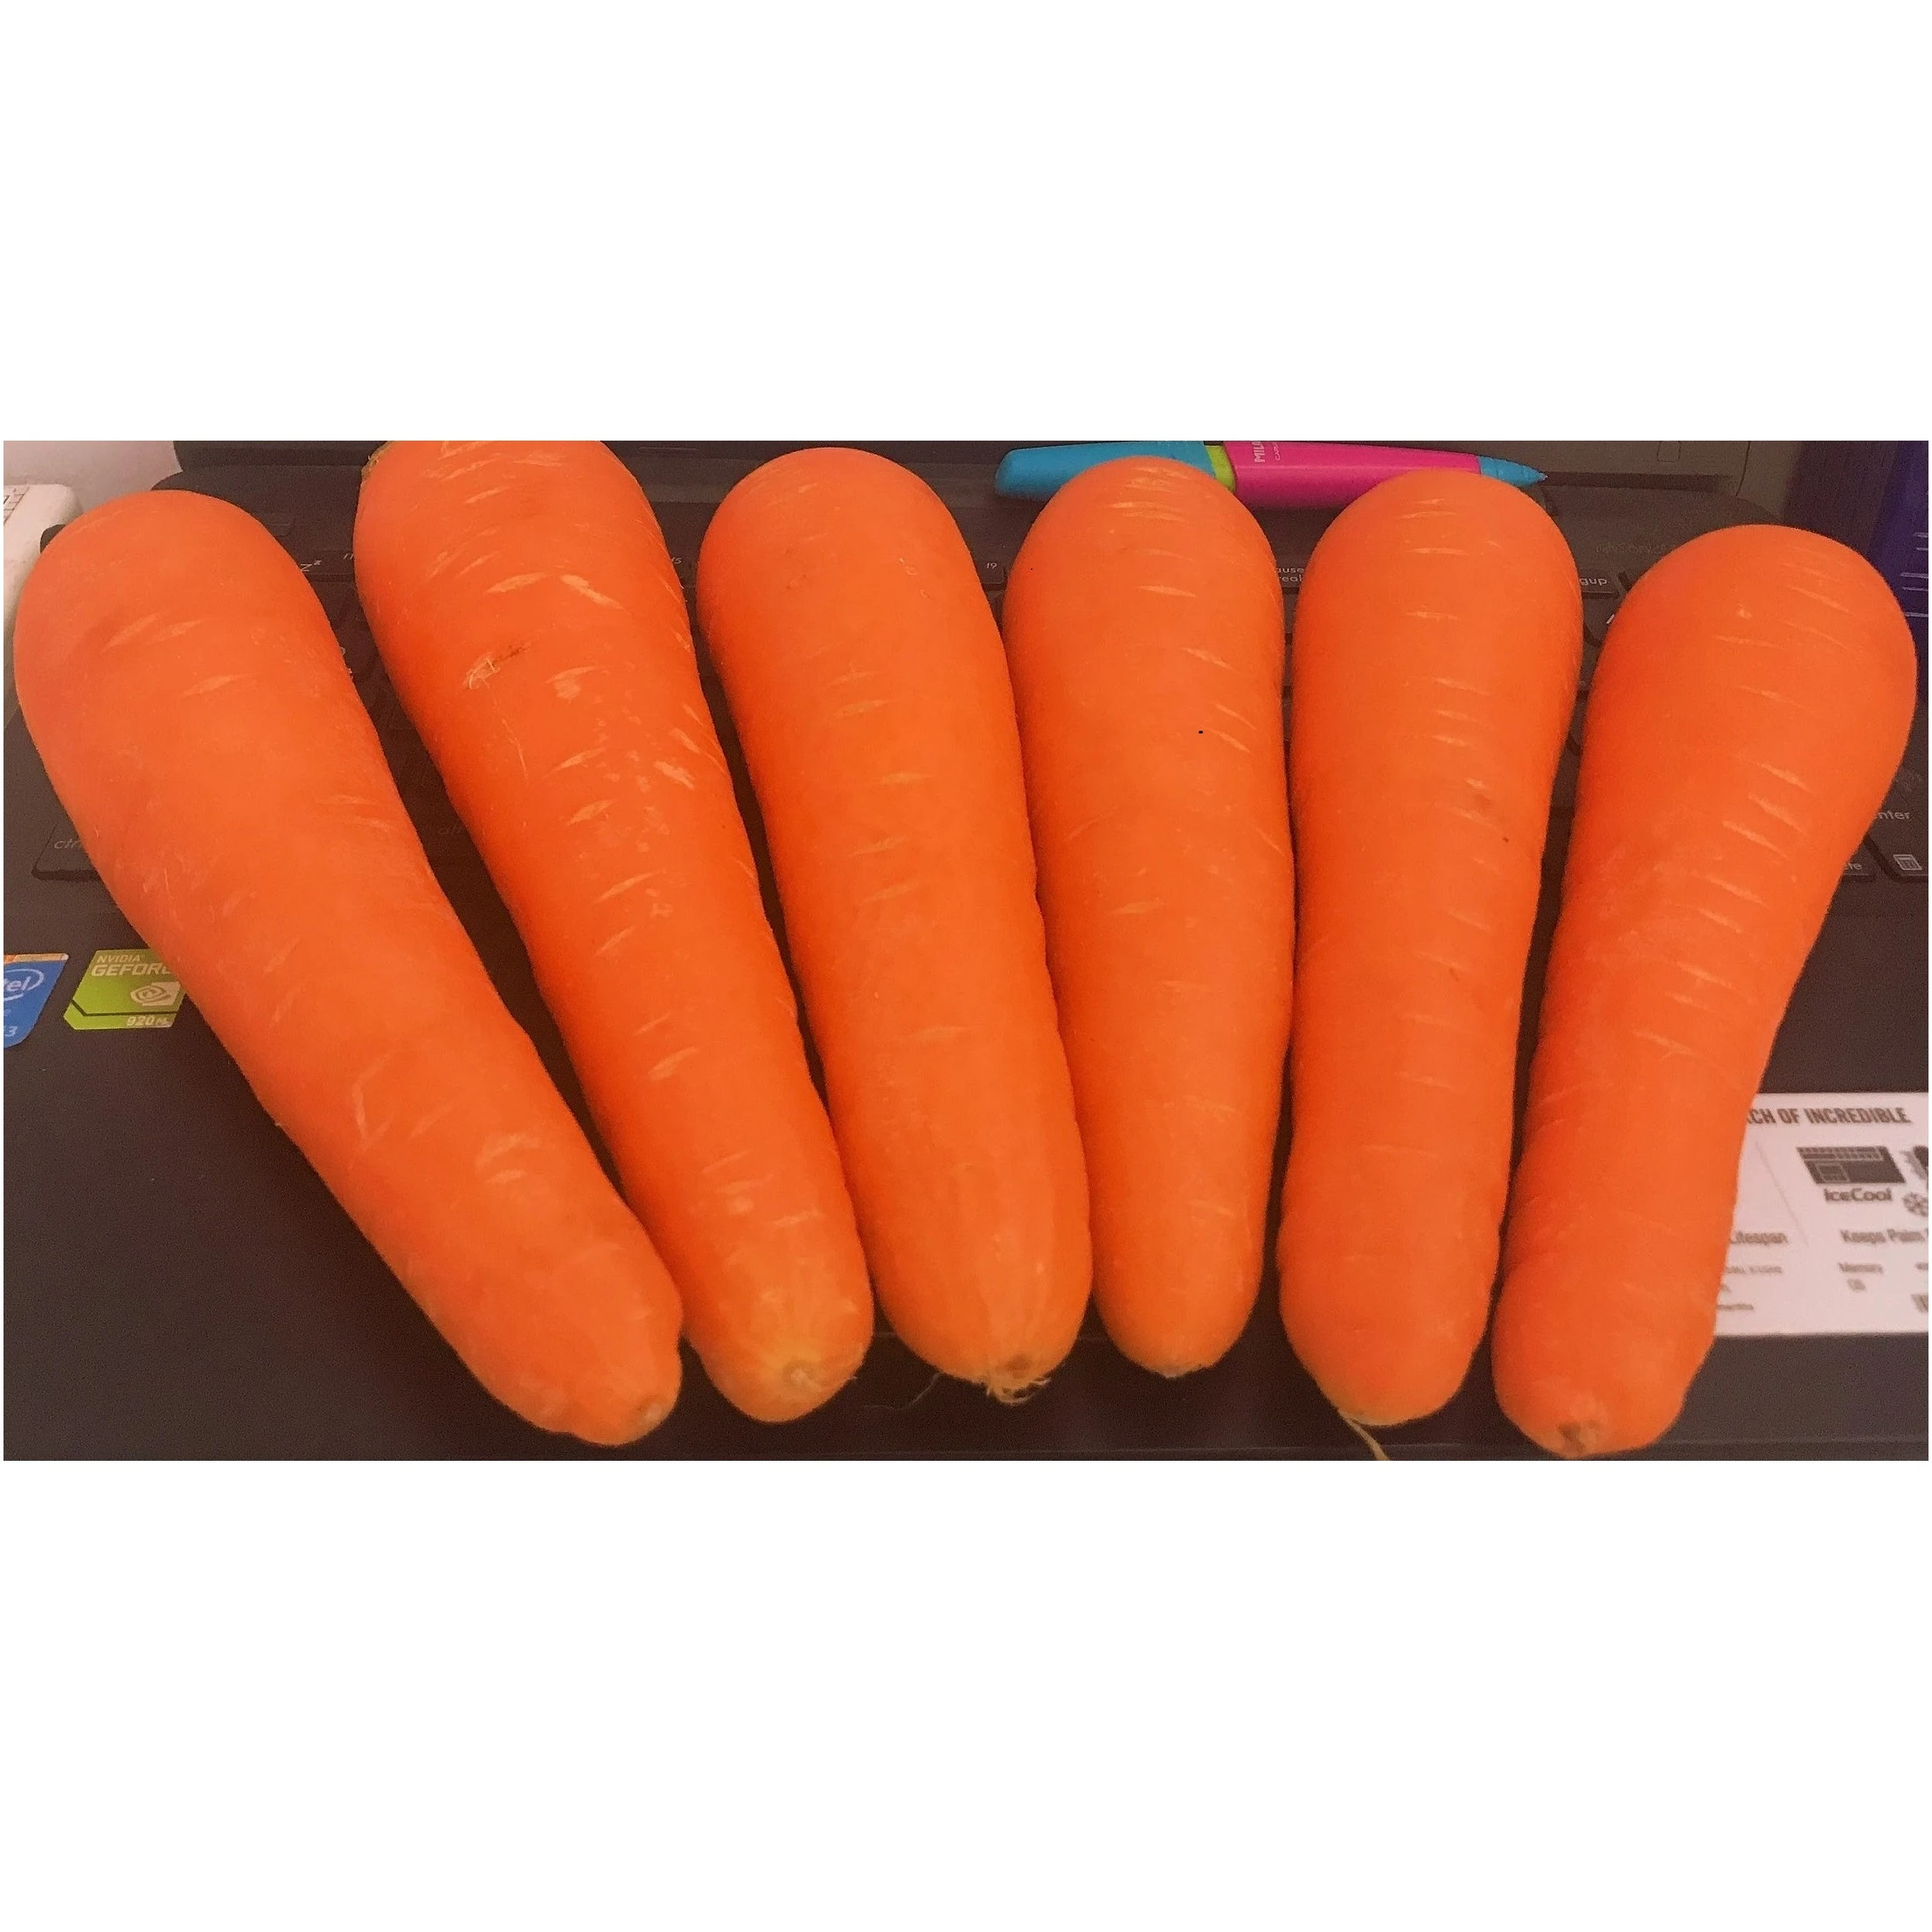 Packed Carrots With High Quality And Best Selling Price From Trung My Company Vietnam